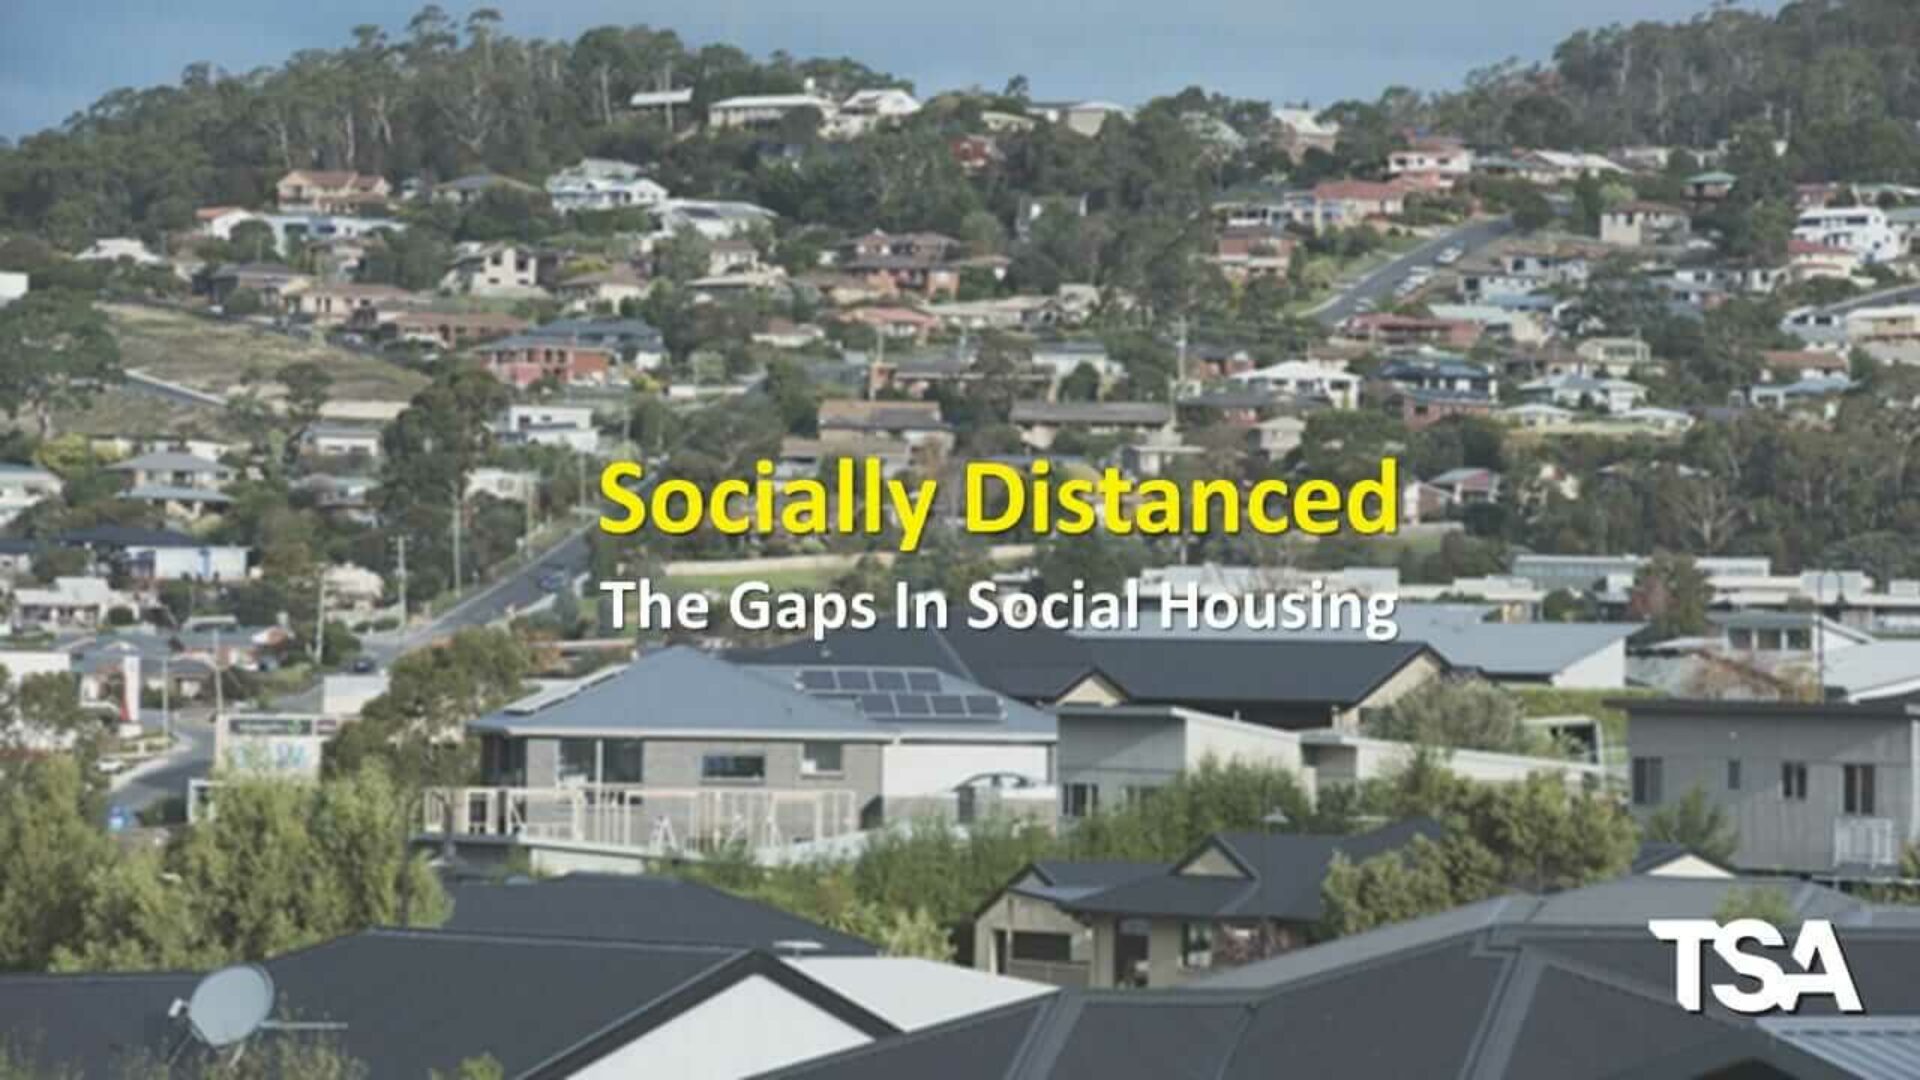 Social housing – A round table discussion